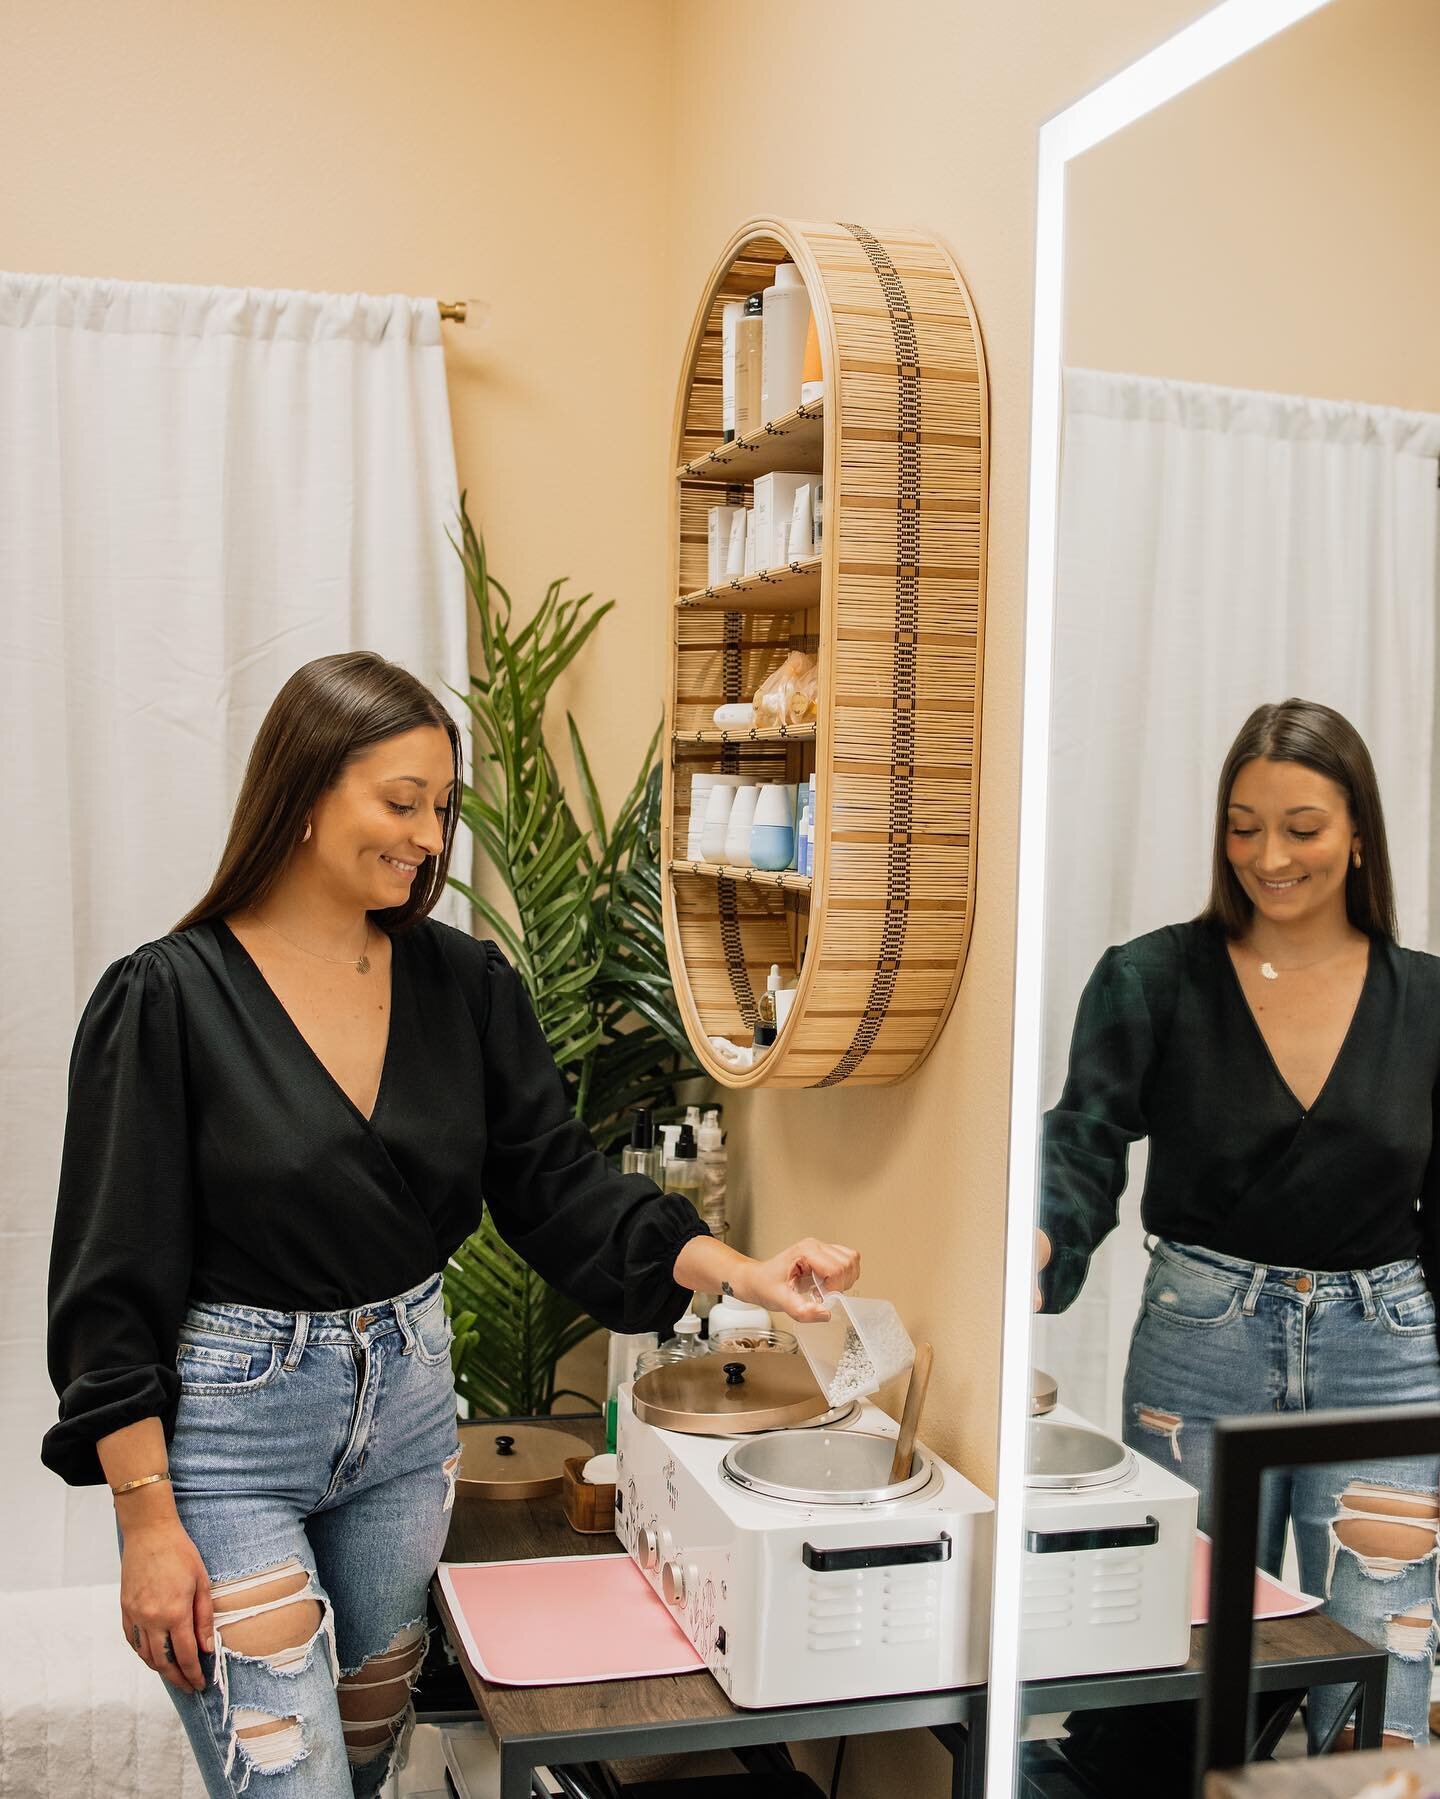 Capturing the beauty of @kristy.michelle.aesthetics and her stunning new studio! 📷✨ 

As an esthetician, Kristy knows all about bringing out your best features, and it was such an honor to capture her in action during her first-ever professional pho